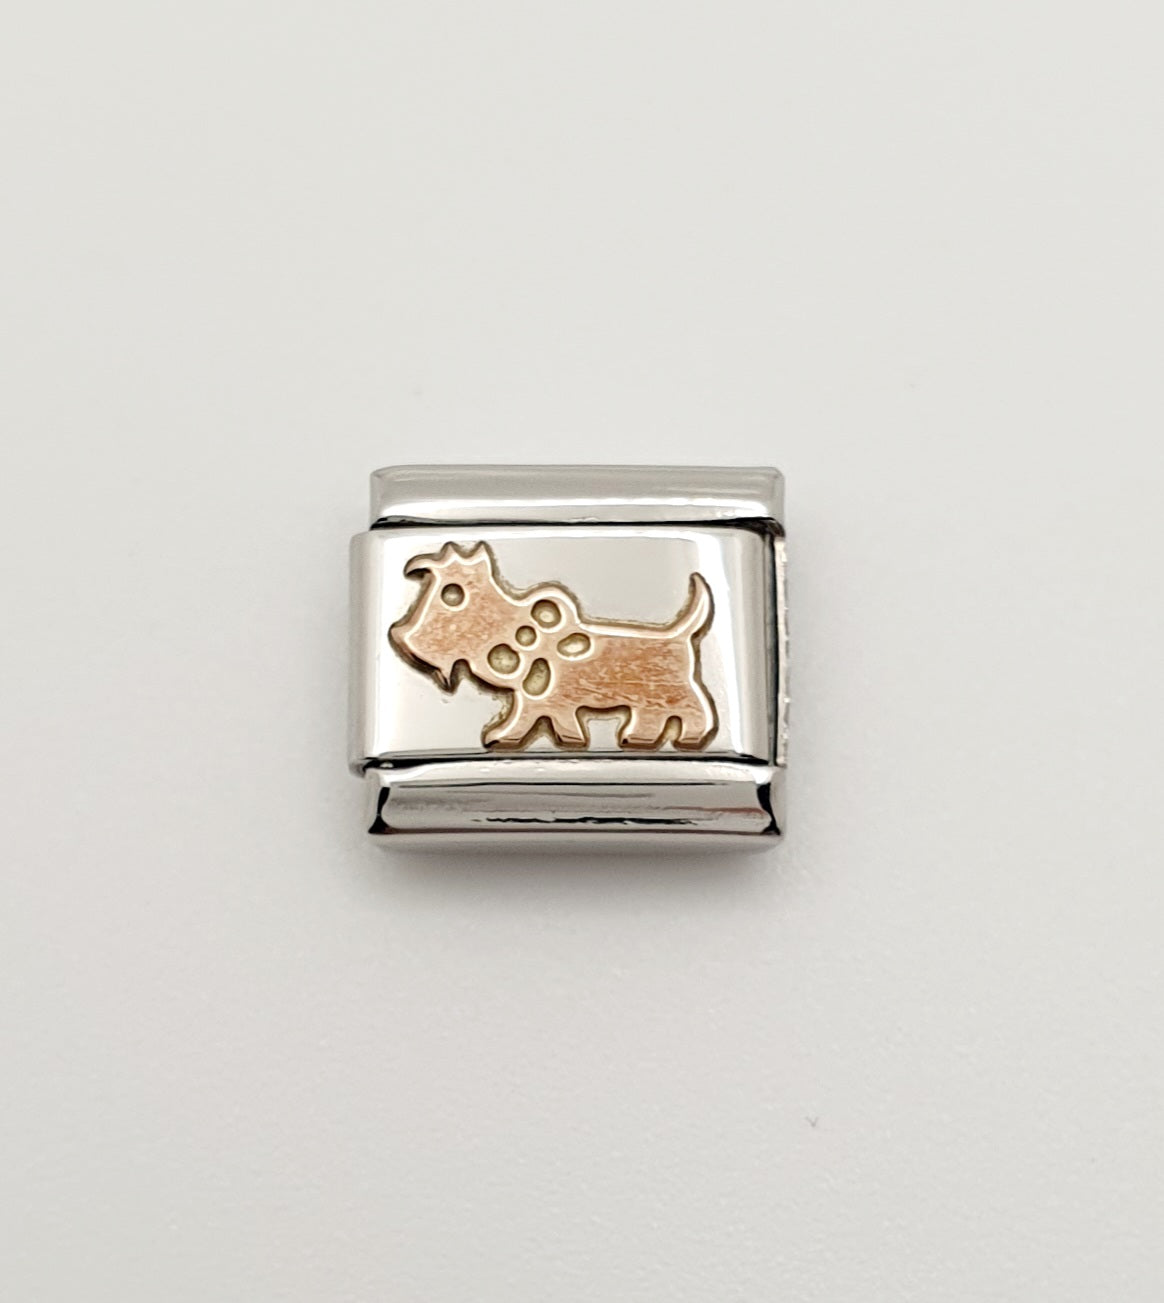 Nomination Charm Link "Dog" Stainless Steel with 9k Rose Gold, 430104 10